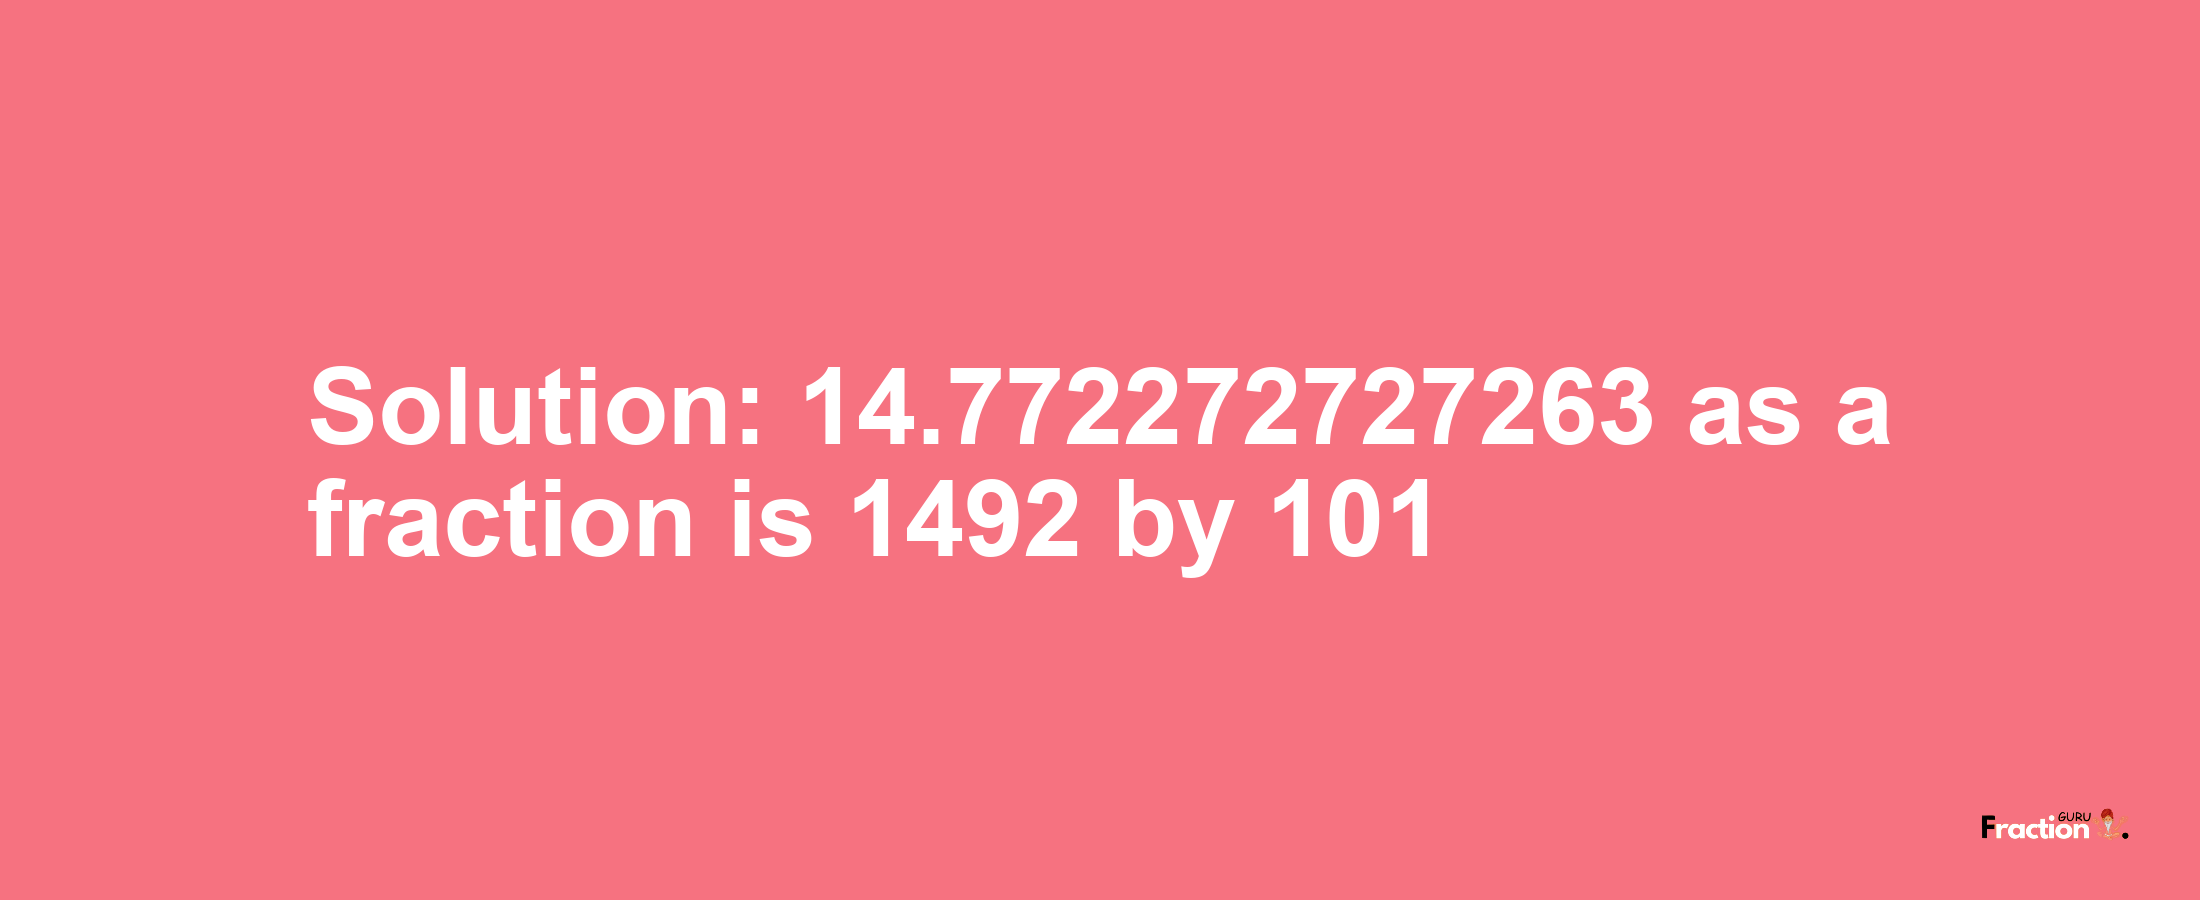 Solution:14.772272727263 as a fraction is 1492/101